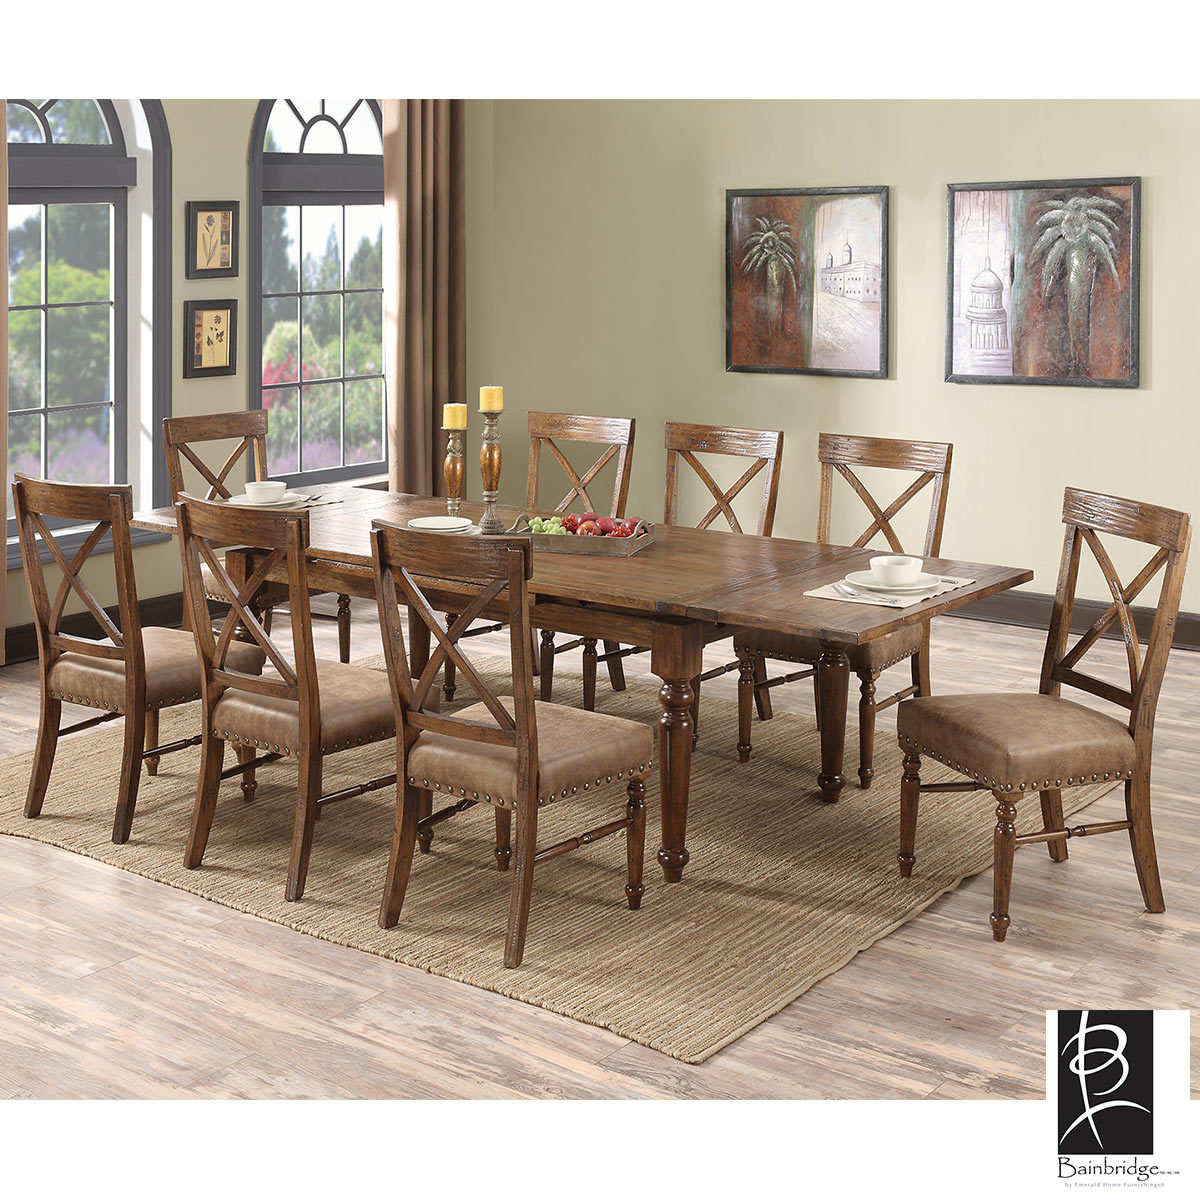 Chattanooga Extending Dining Room Table 8 Chairs Costco Uk